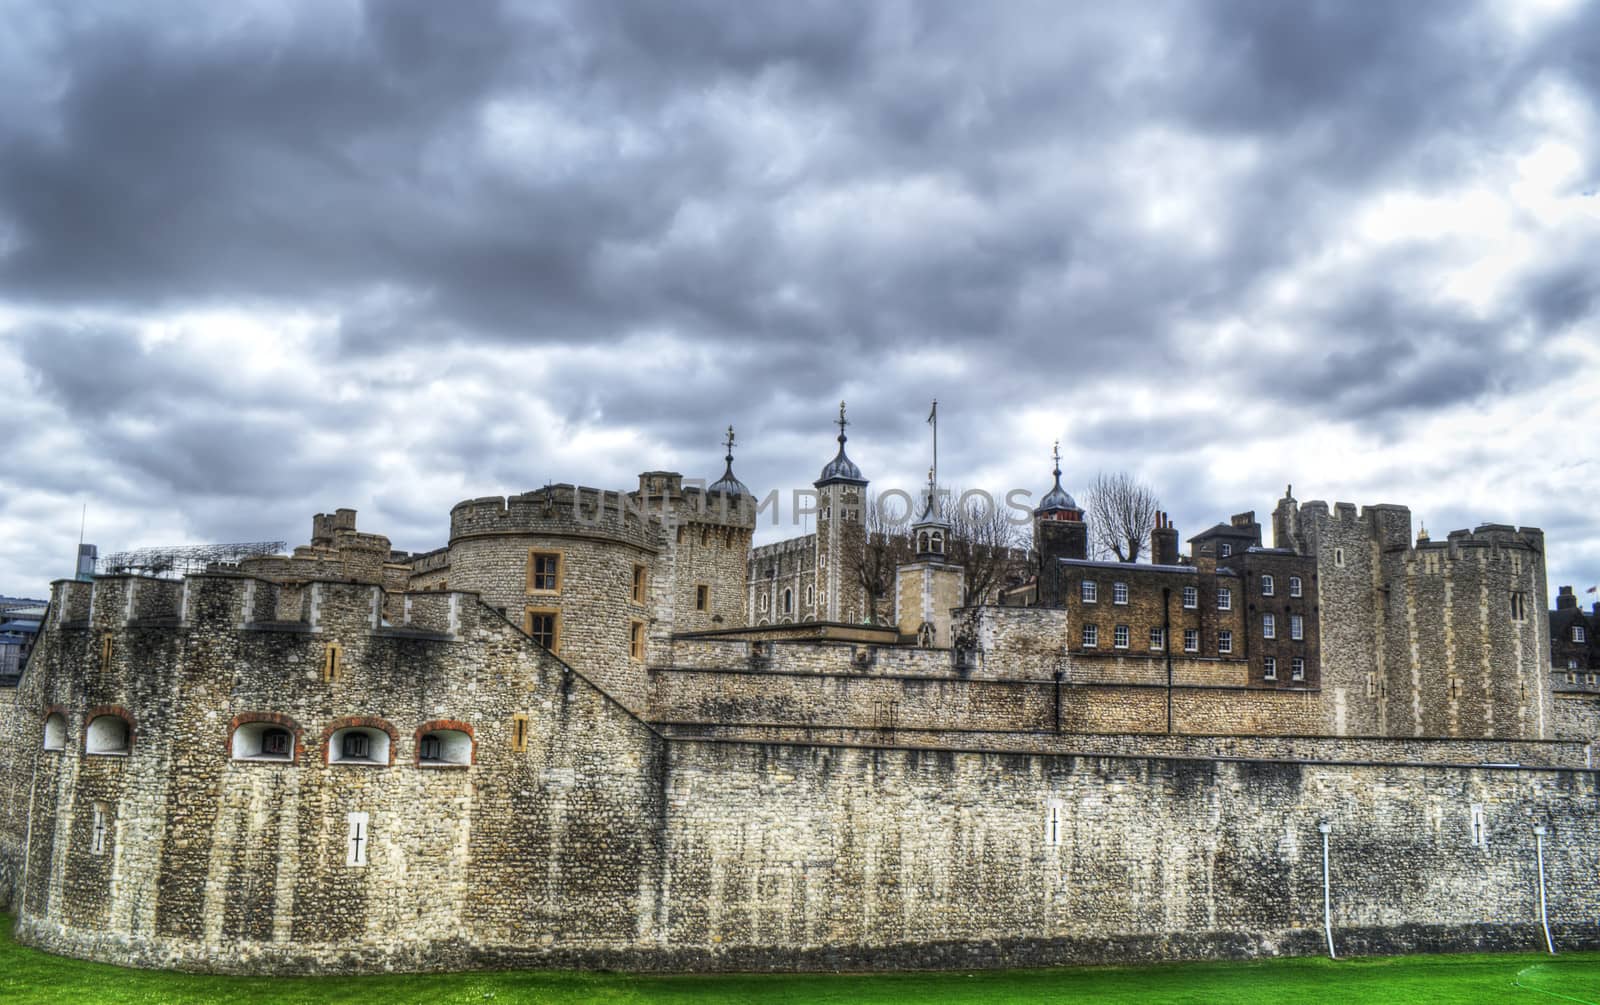 The Tower of London, Medieval Castle and Prison, England